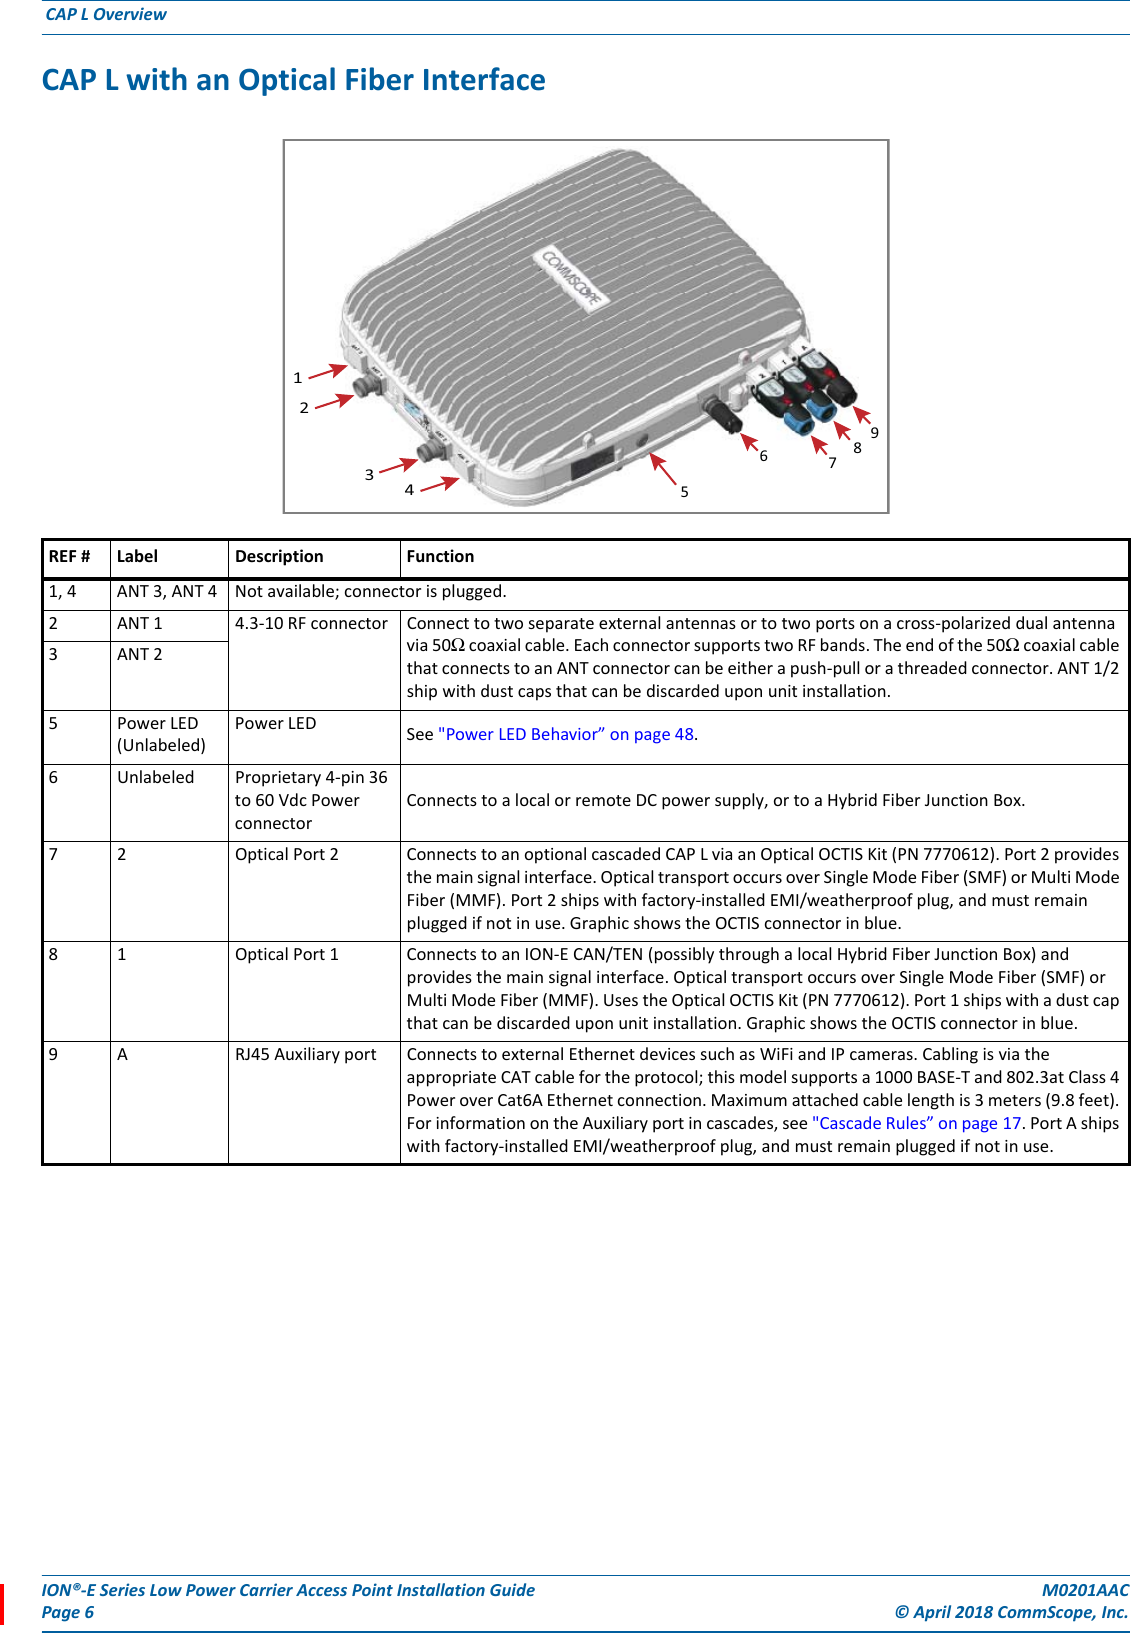 ION®-E Series Low Power Carrier Access Point Installation Guide M0201AACPage 6 © April 2018 CommScope, Inc. CAP L Overview  CAP L with an Optical Fiber Interface REF # Label Description Function1, 4 ANT 3, ANT 4 Not available; connector is plugged.2 ANT 1  4.3-10 RF connector Connect to two separate external antennas or to two ports on a cross-polarized dual antenna via 50Ω coaxial cable. Each connector supports two RF bands. The end of the 50Ω coaxial cable that connects to an ANT connector can be either a push-pull or a threaded connector. ANT 1/2 ship with dust caps that can be discarded upon unit installation. 3ANT 25Power LED (Unlabeled)Power LED See &quot;Power LED Behavior” on page 48.6 Unlabeled  Proprietary 4-pin 36 to 60 Vdc Power connectorConnects to a local or remote DC power supply, or to a Hybrid Fiber Junction Box. 7 2  Optical Port 2 Connects to an optional cascaded CAP L via an Optical OCTIS Kit (PN 7770612). Port 2 provides the main signal interface. Optical transport occurs over Single Mode Fiber (SMF) or Multi Mode Fiber (MMF). Port 2 ships with factory-installed EMI/weatherproof plug, and must remain plugged if not in use. Graphic shows the OCTIS connector in blue.8 1  Optical Port 1 Connects to an ION-E CAN/TEN (possibly through a local Hybrid Fiber Junction Box) and provides the main signal interface. Optical transport occurs over Single Mode Fiber (SMF) or Multi Mode Fiber (MMF). Uses the Optical OCTIS Kit (PN 7770612). Port 1 ships with a dust cap that can be discarded upon unit installation. Graphic shows the OCTIS connector in blue.9 A RJ45 Auxiliary port Connects to external Ethernet devices such as WiFi and IP cameras. Cabling is via the appropriate CAT cable for the protocol; this model supports a 1000 BASE-T and 802.3at Class 4 Power over Cat6A Ethernet connection. Maximum attached cable length is 3 meters (9.8 feet). For information on the Auxiliary port in cascades, see &quot;Cascade Rules” on page 17. Port A ships with factory-installed EMI/weatherproof plug, and must remain plugged if not in use.123478965